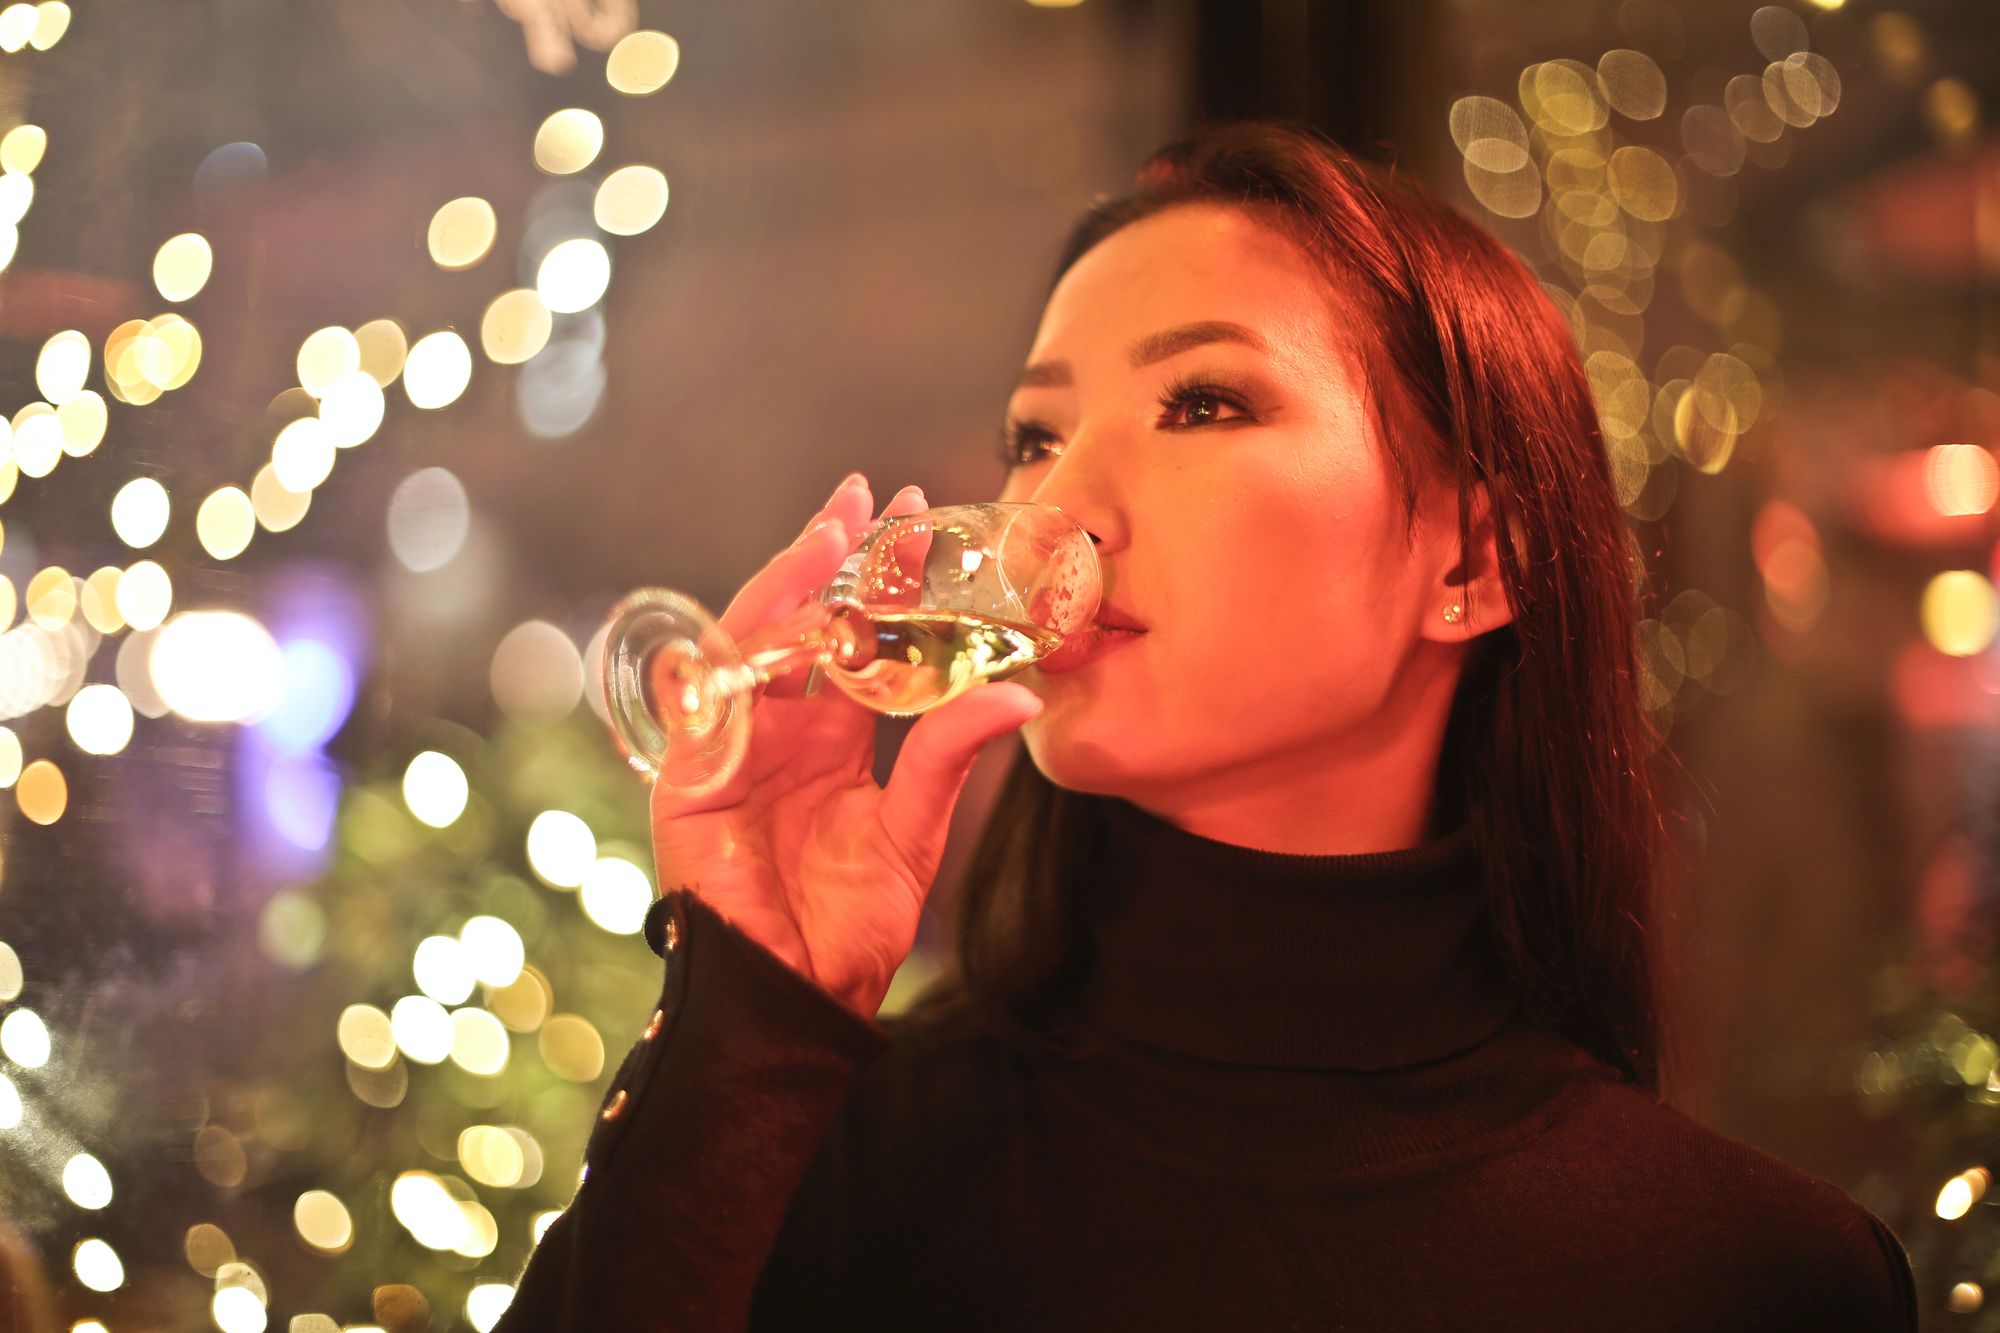 A person drinking wine from a wine glass